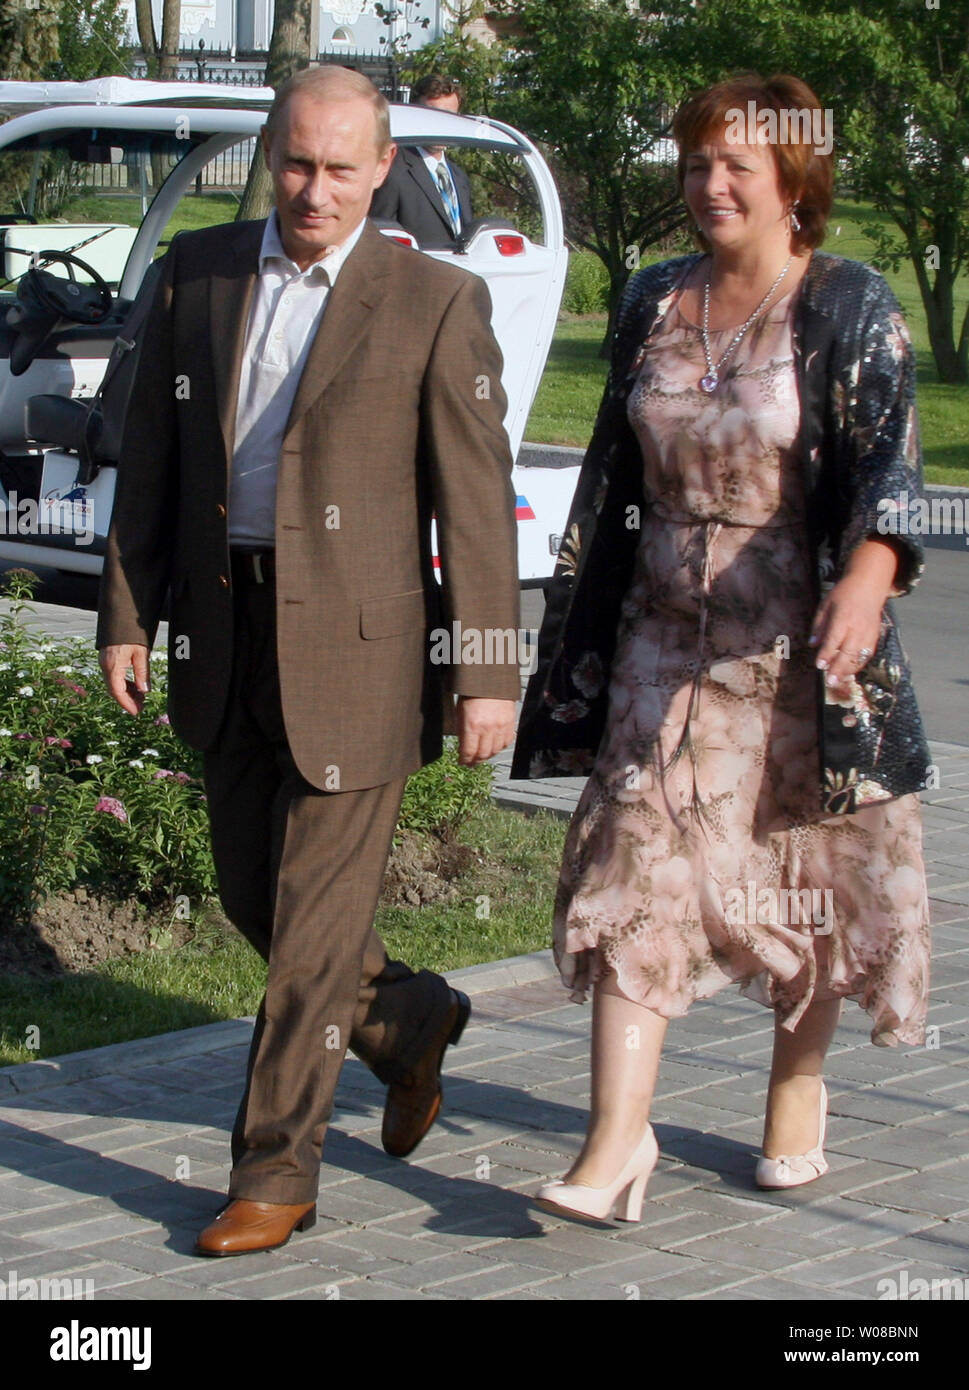 Russian President Vladimir Putin arrives with his wife Lyudmila to have dinner with U.S. President George W. Bush at the Italian Guest House in the Konstantinovsky Palace Complex in Strelna, in the outskirts of St. Petersburg on July 14, 2006. Bush is visiting Russia to attend the G8 summit this weekend. (UPI Photo/Anatoli Zhdanov) Stock Photo